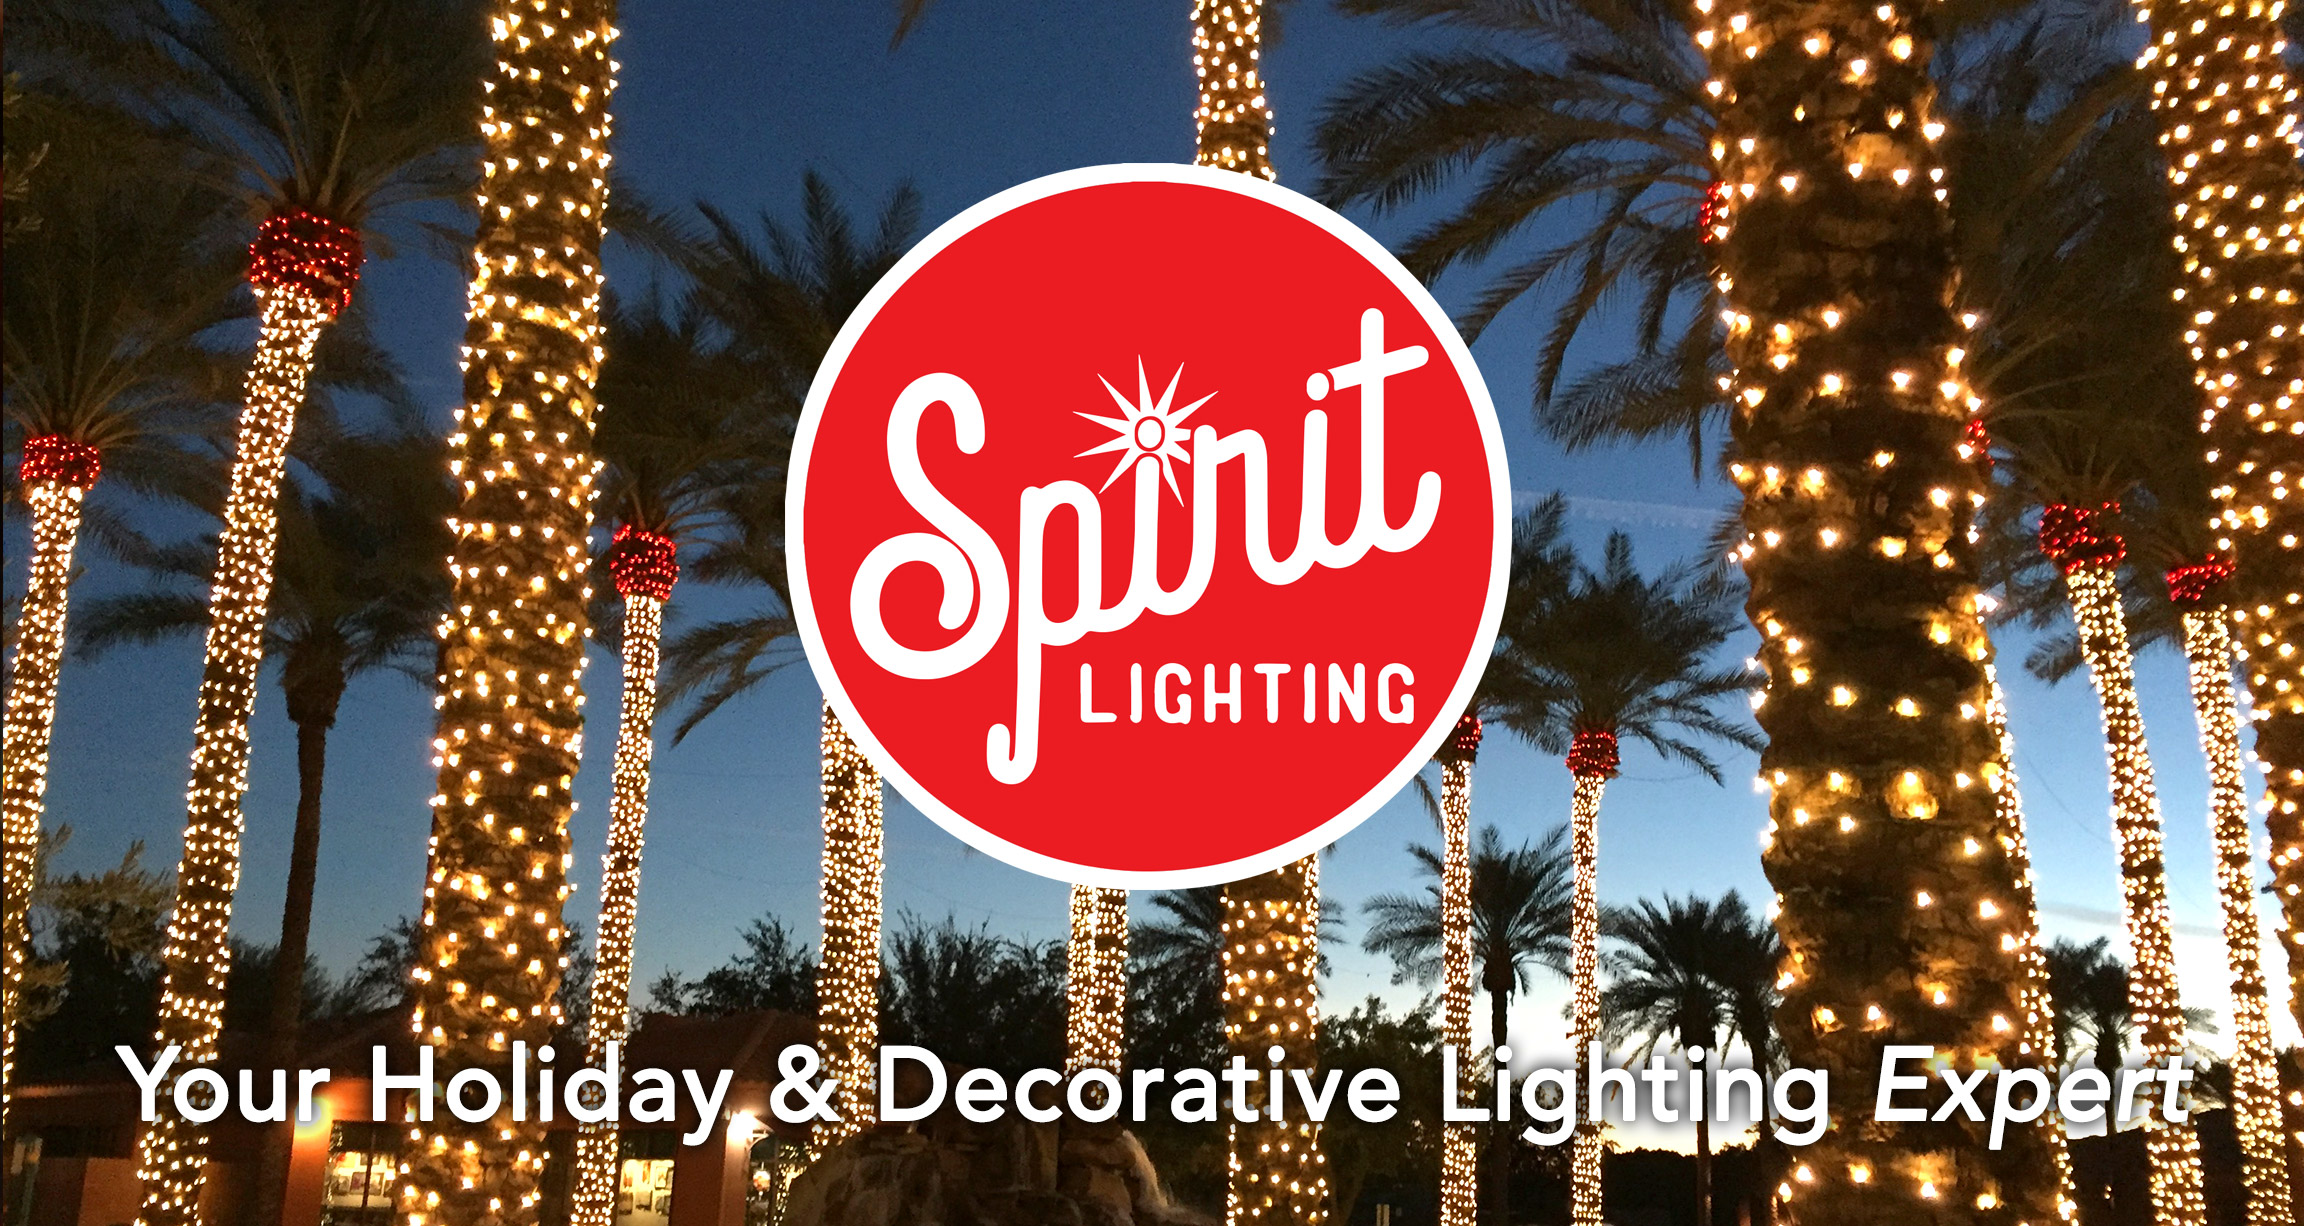 SPIRIT LIGHTING IS A FULL SERVICE HOLIDAY DECORATING COMPANY IN PHOENIX, ARIZONA. Spirit Lighting will design, install, maintain, and remove a professional holiday display for your business or home.